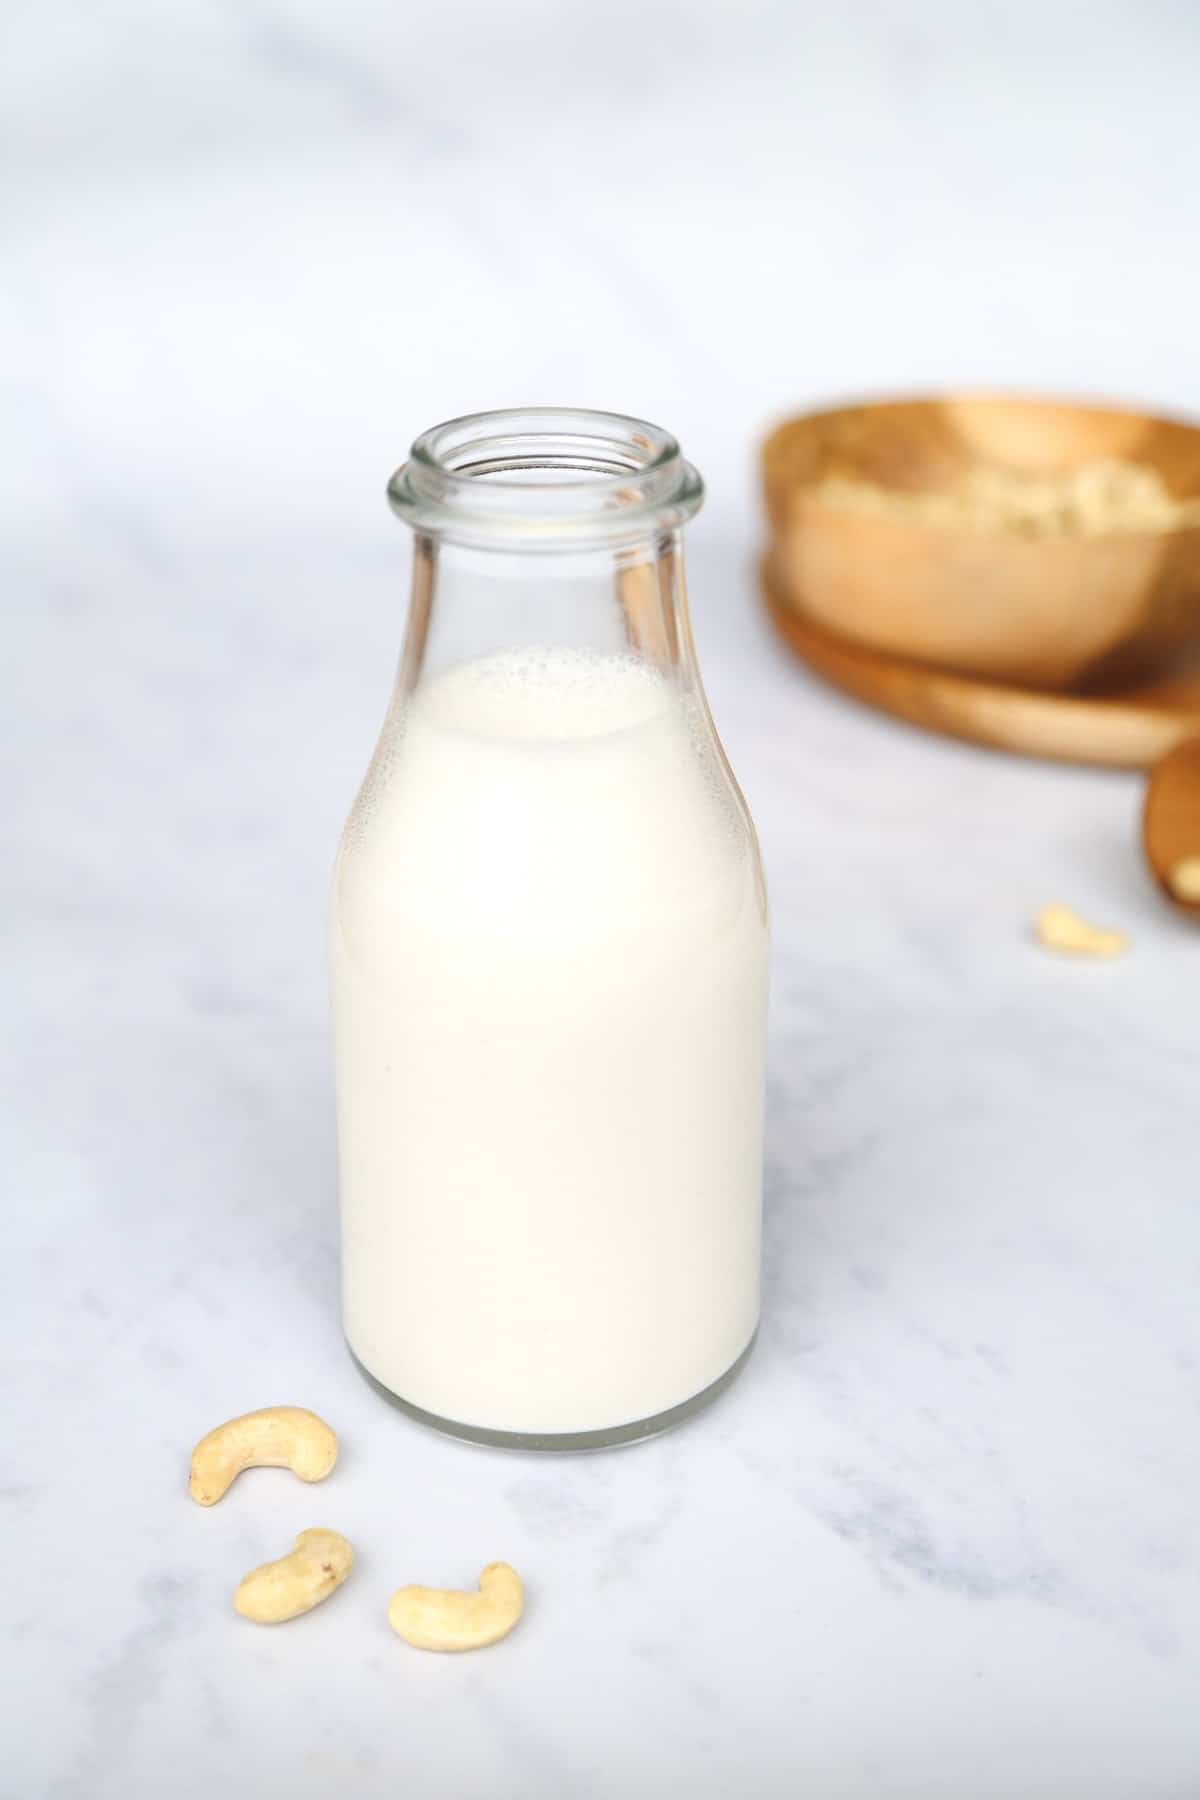 Creamy homemade cashew milk in a glass bottle, with some cashew nuts on the counter